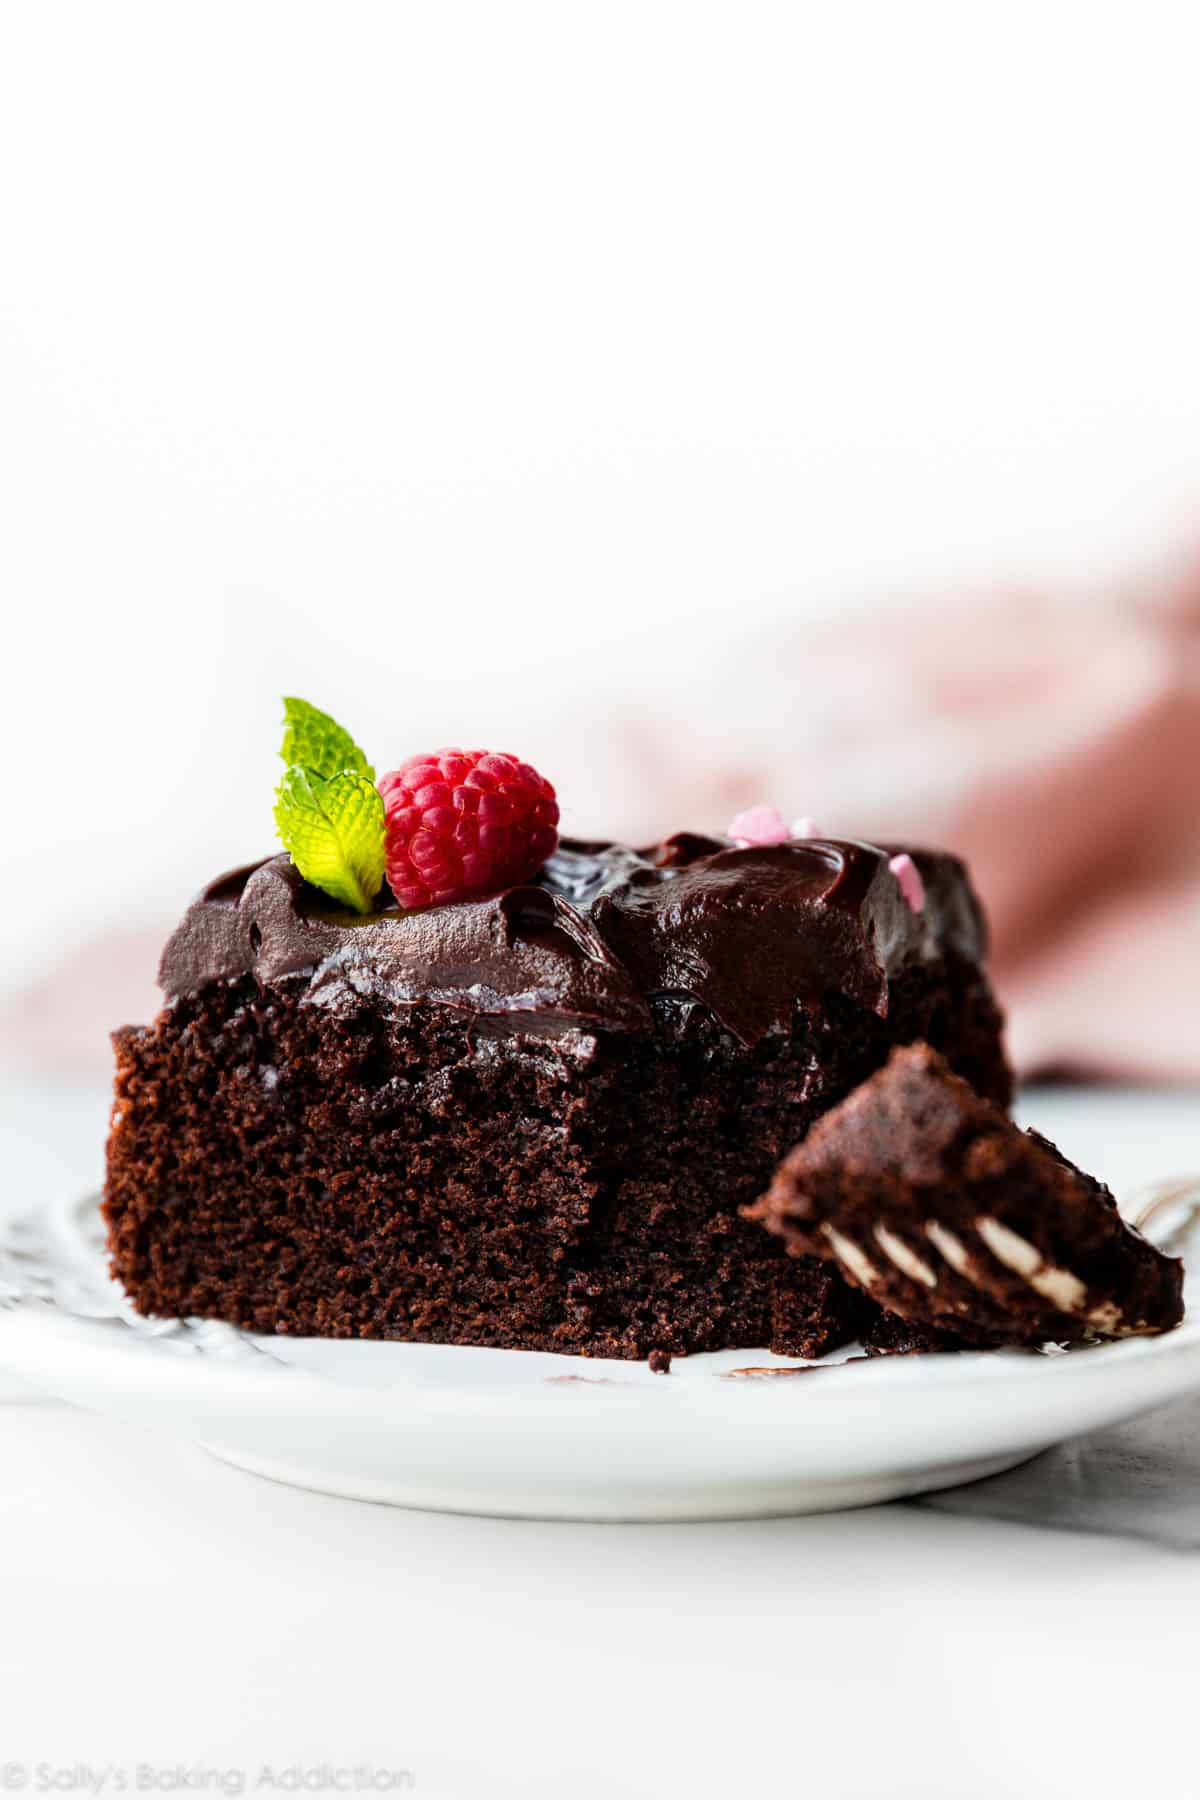 small slice of chocolate cake with chocolate ganache, mint, and a raspberry on top